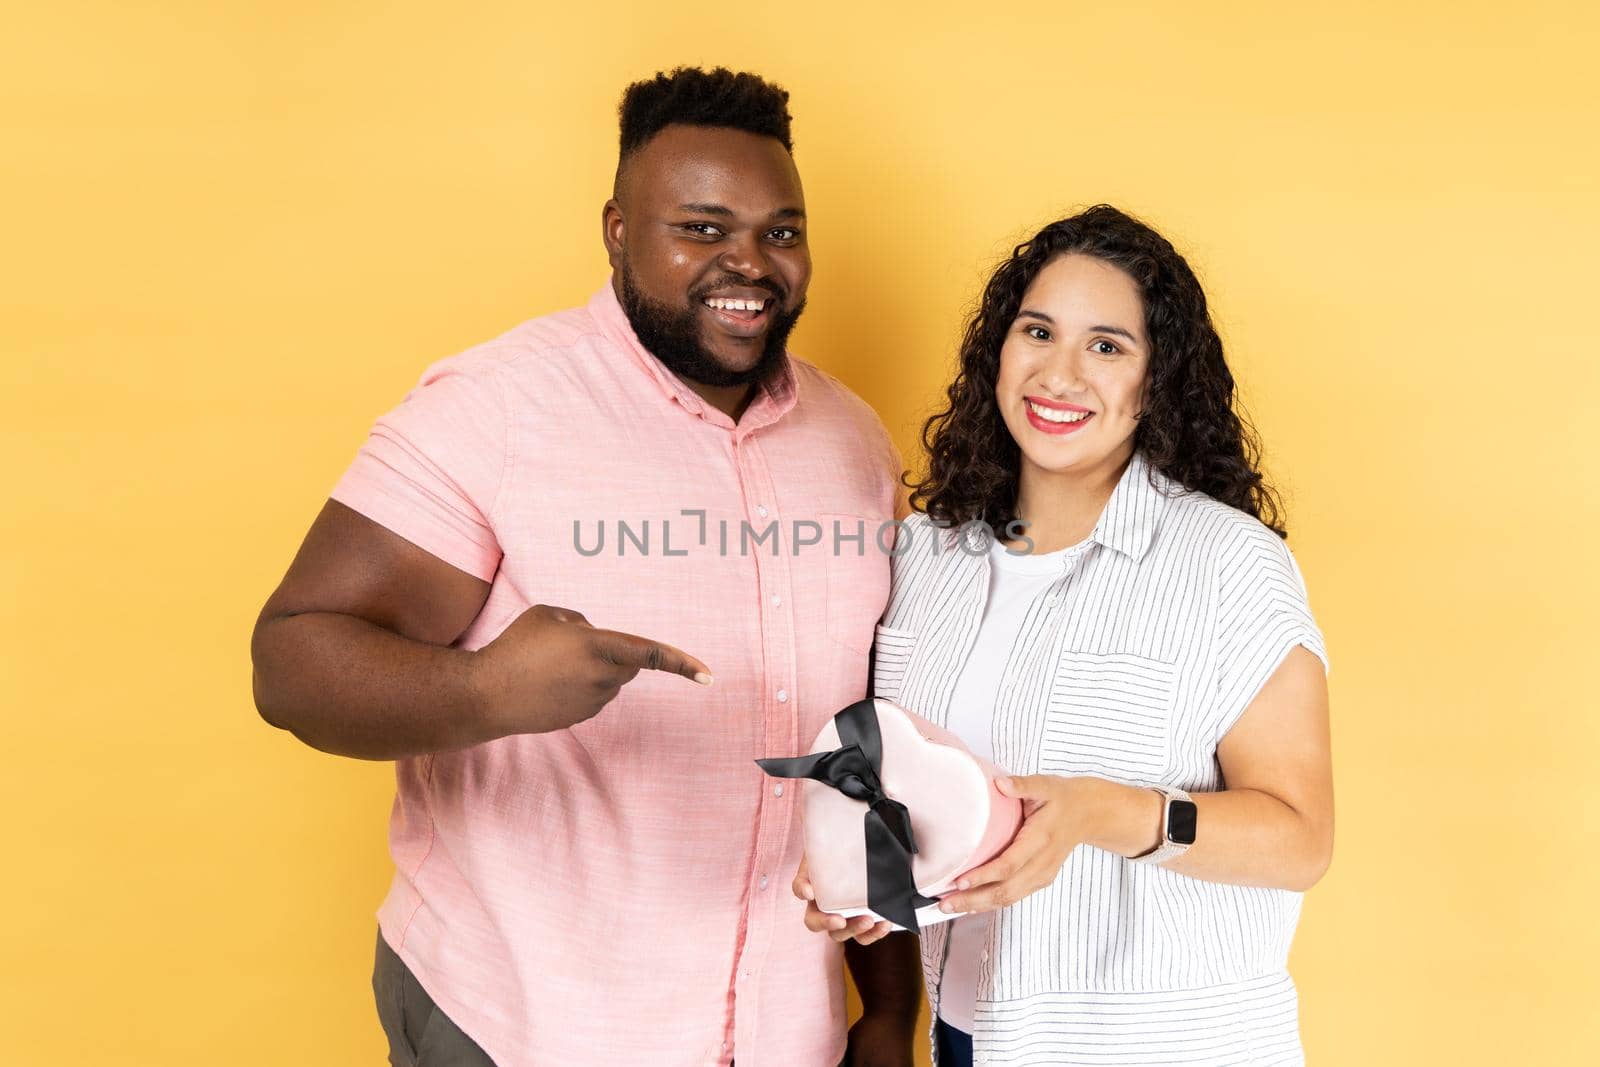 Portrait of delighted smiling young couple in casual clothing standing together, man pointing at present box in her wife hands, celebrating holiday. Indoor studio shot isolated on yellow background.